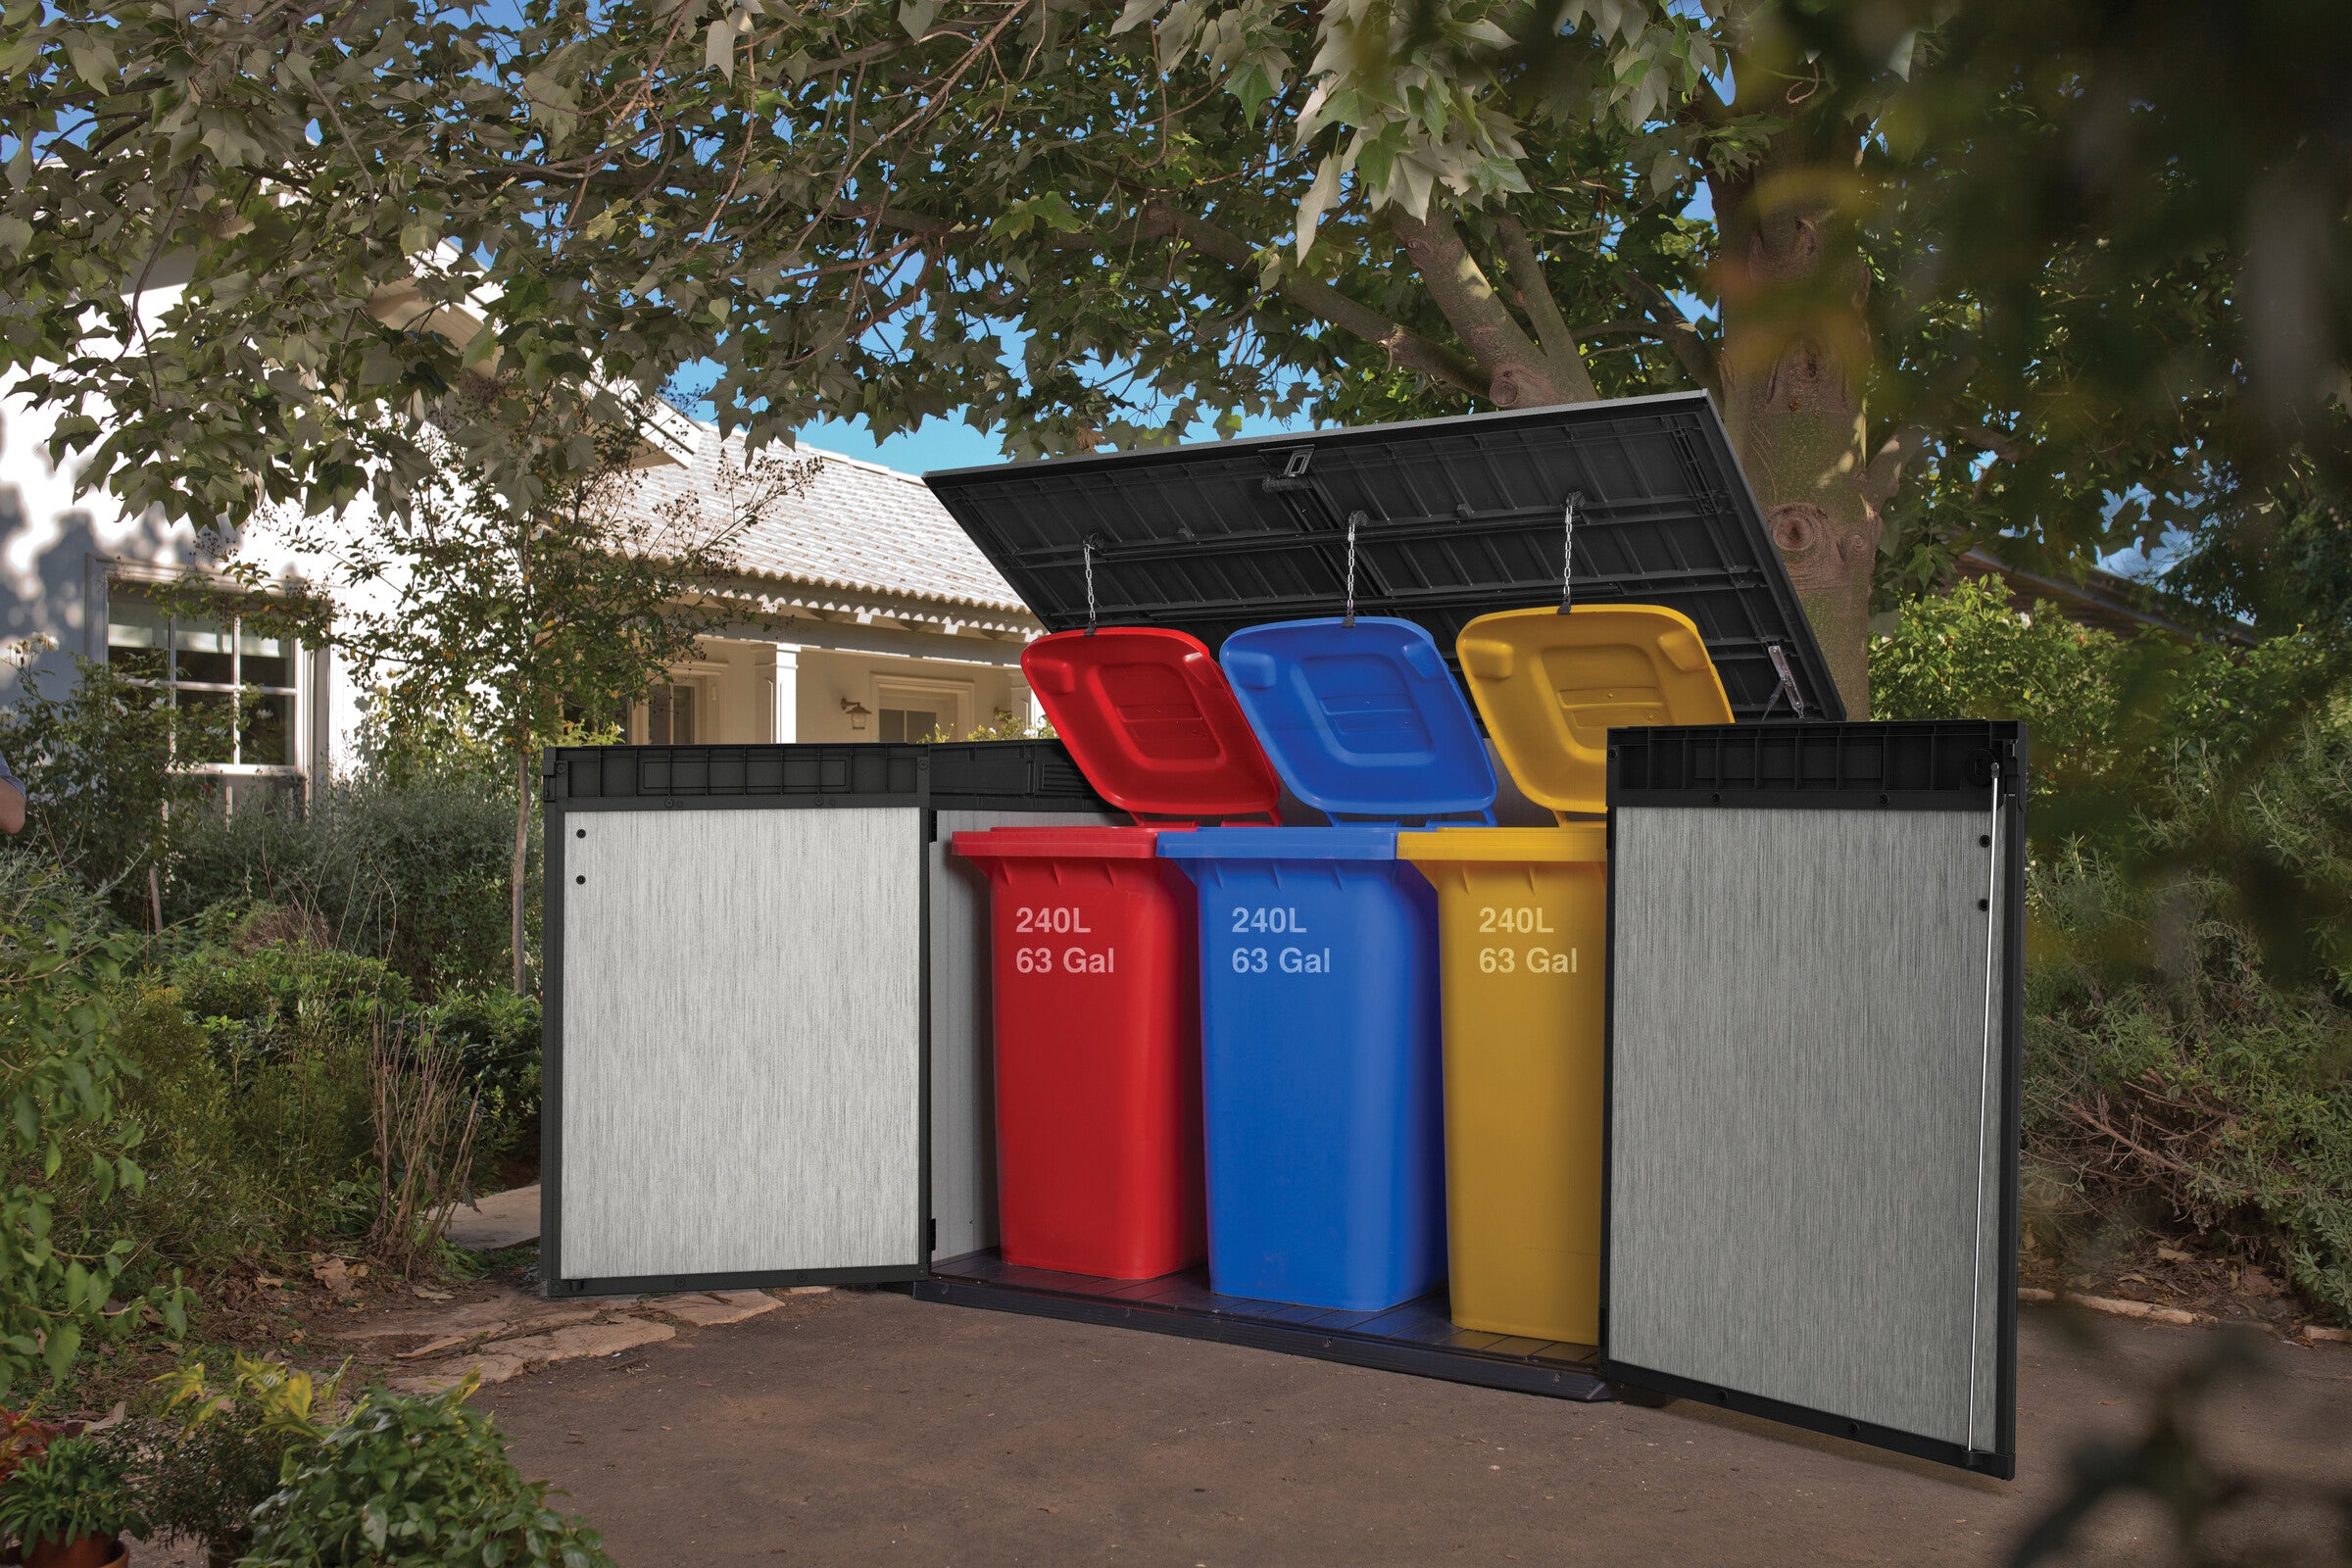 3 large rubbish bins being stored in the Grande Store